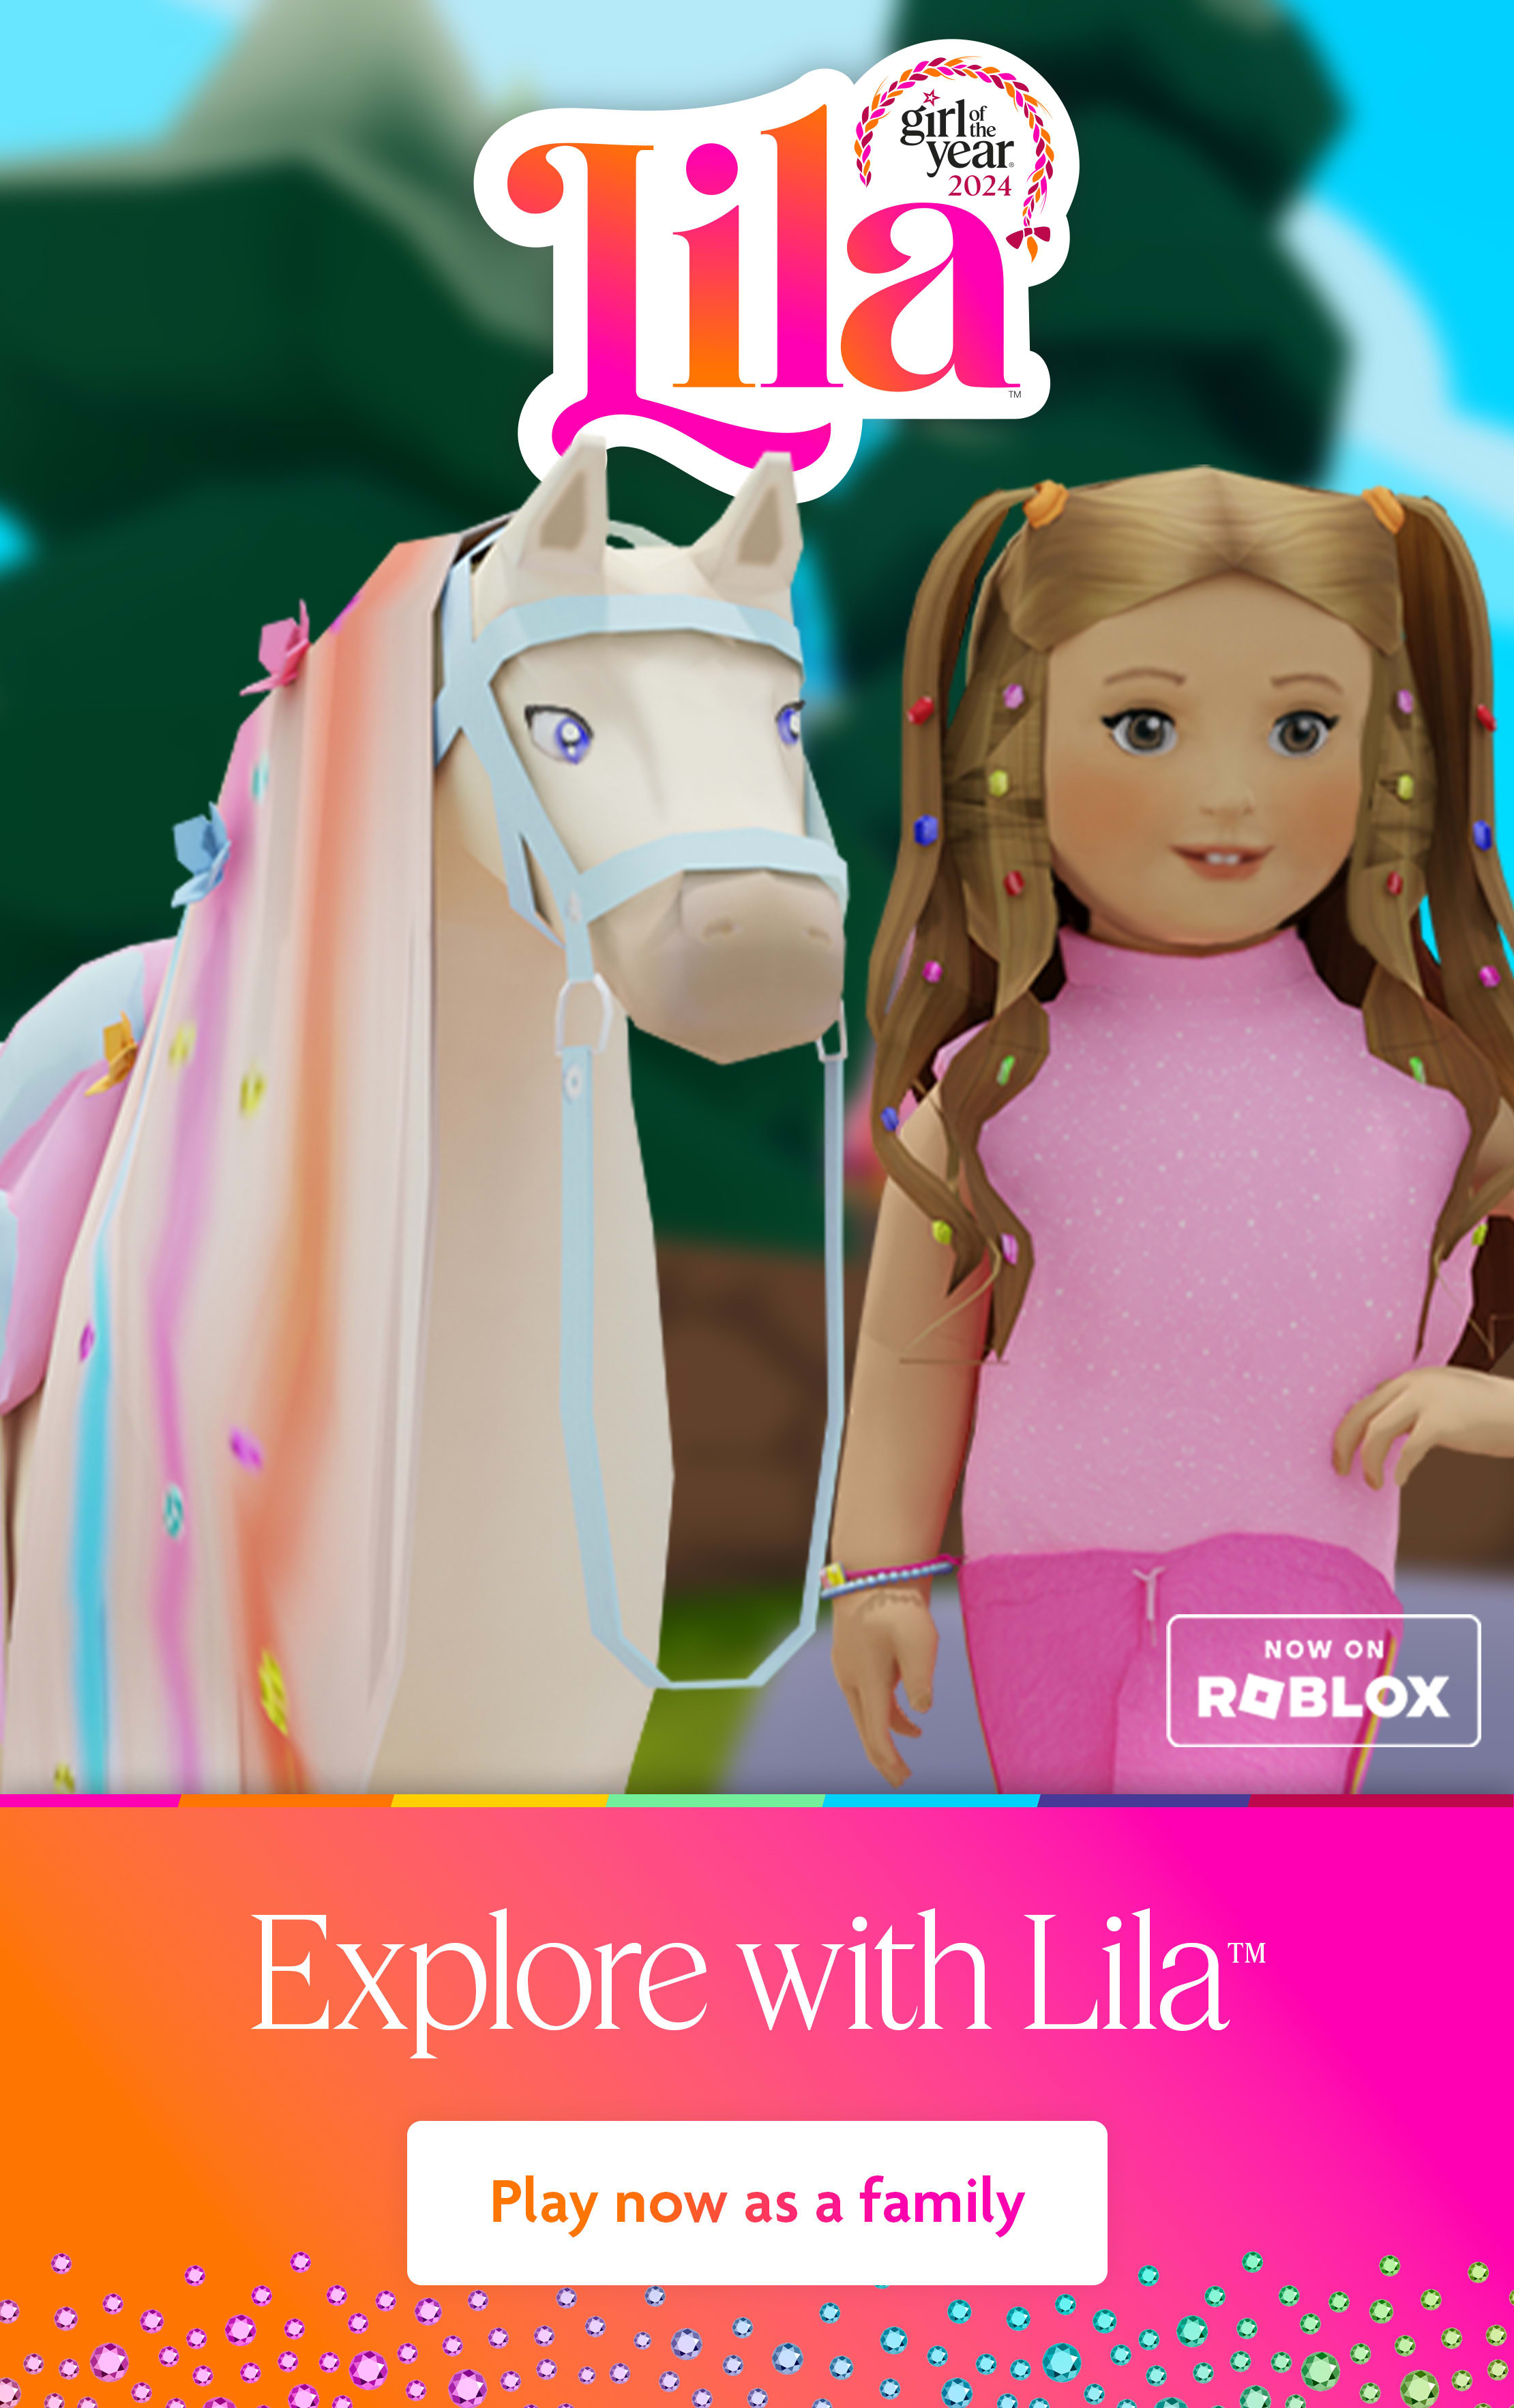 Limited Edition Historical Outfits, American Girl Wiki